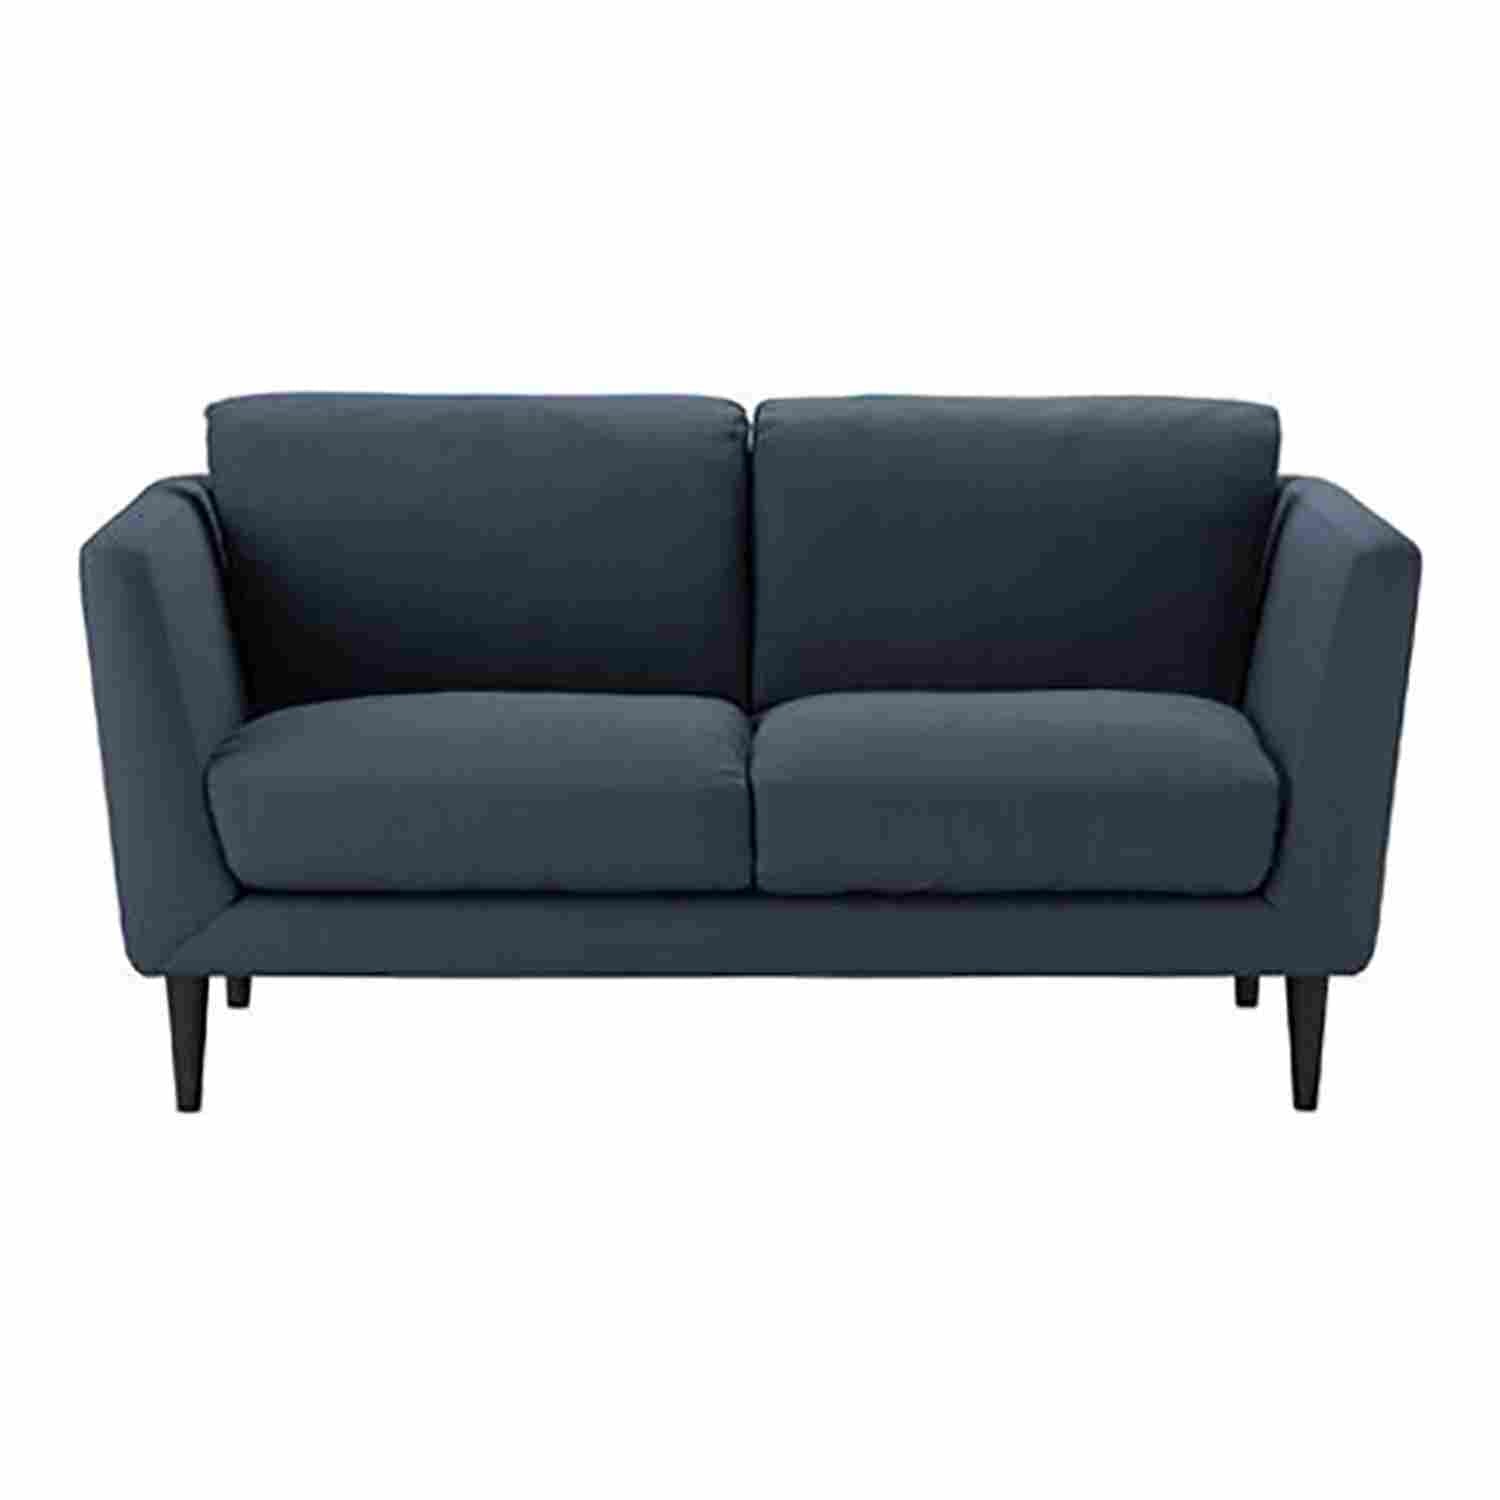 Holly Brushed Linen Cotton Sofa - 2 Seater